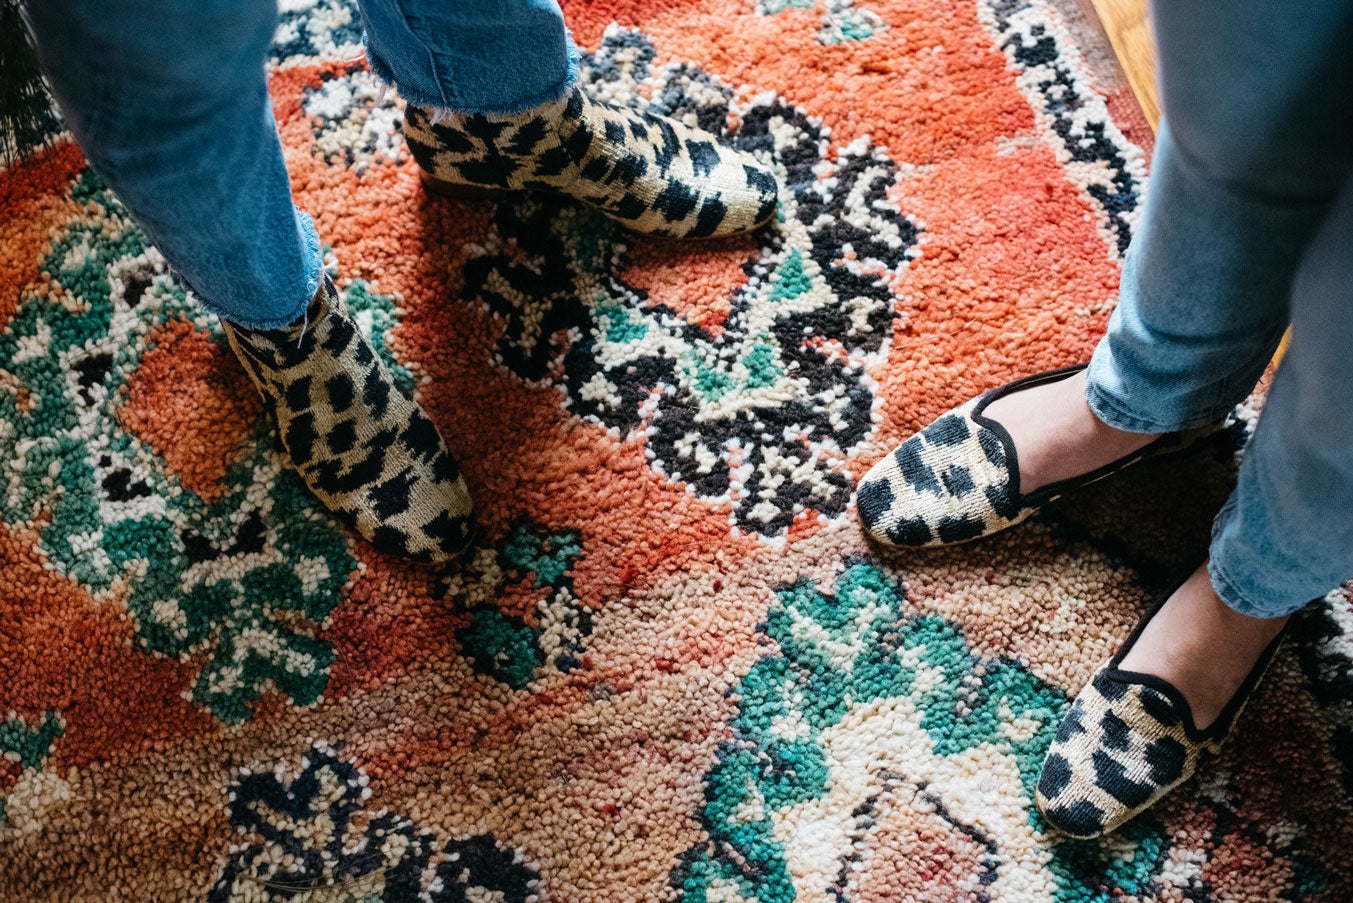 Our leopard print loafers worn on a moroccan carpet next to our matching velvet boots.